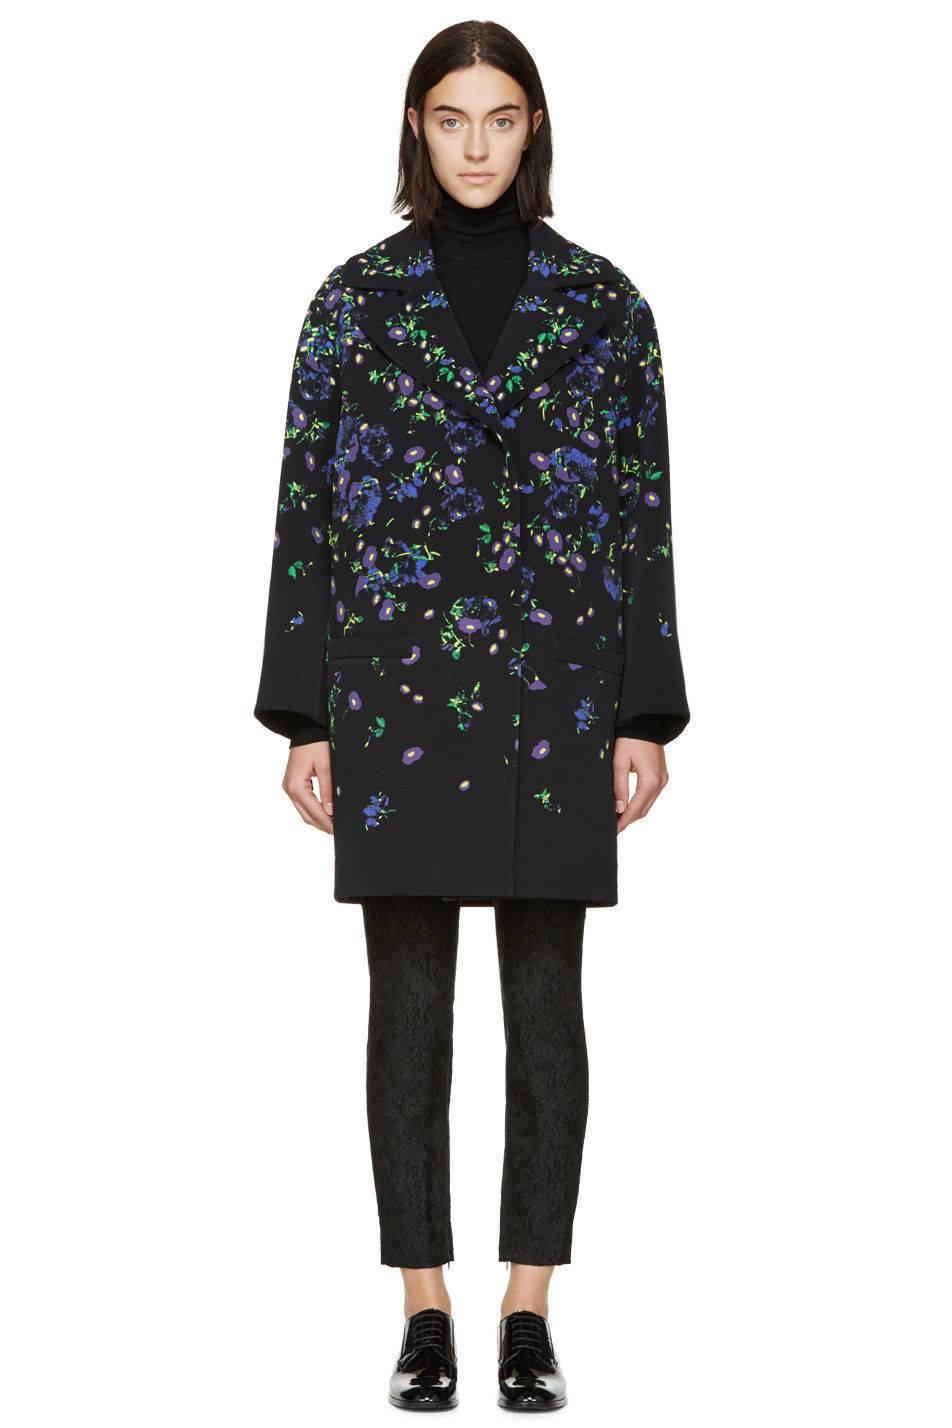 Erdem Black Floral Oversized Coat Uk 8 
Beautiful floral statement coat with popper fastening 
Some smalls pulls under the arm as seen in the last photo, not noticeable.
Length 34 inches, chest 20 inches across, waist 15 inches, hips 20 inches